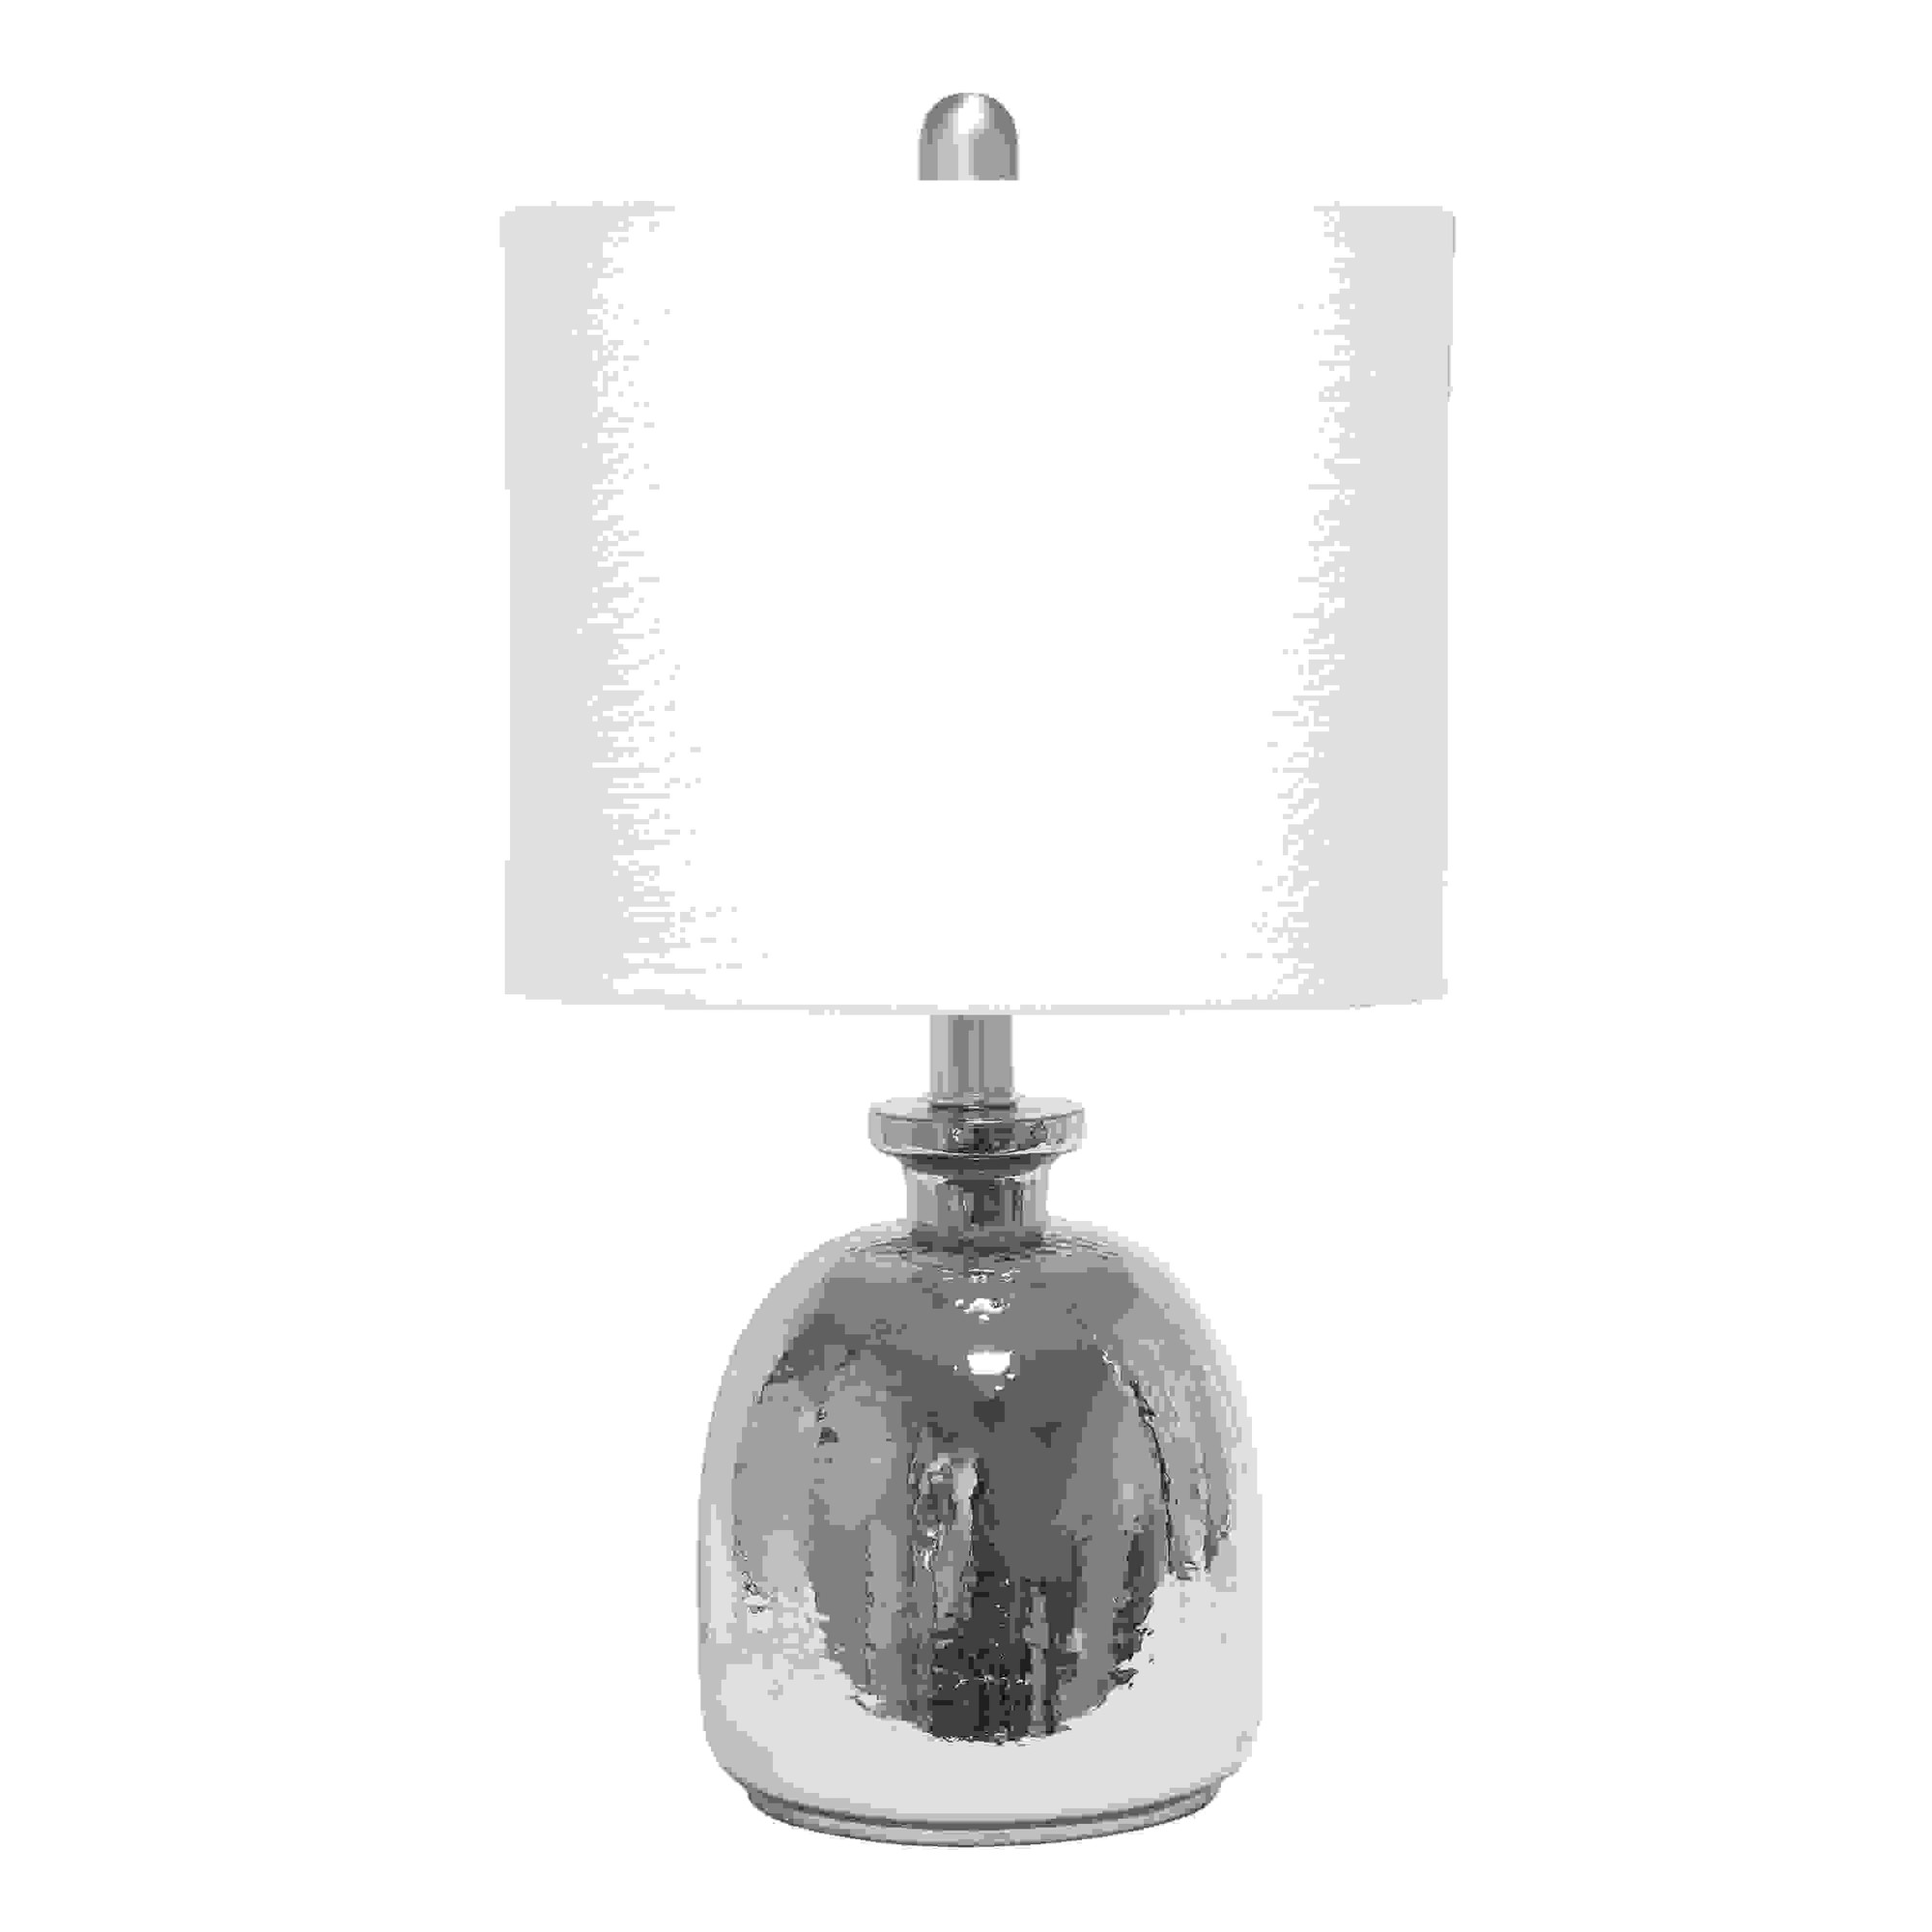 Lalia Home Metallic Gray Hammered Glass Jar Table Lamp with White Linen Shade